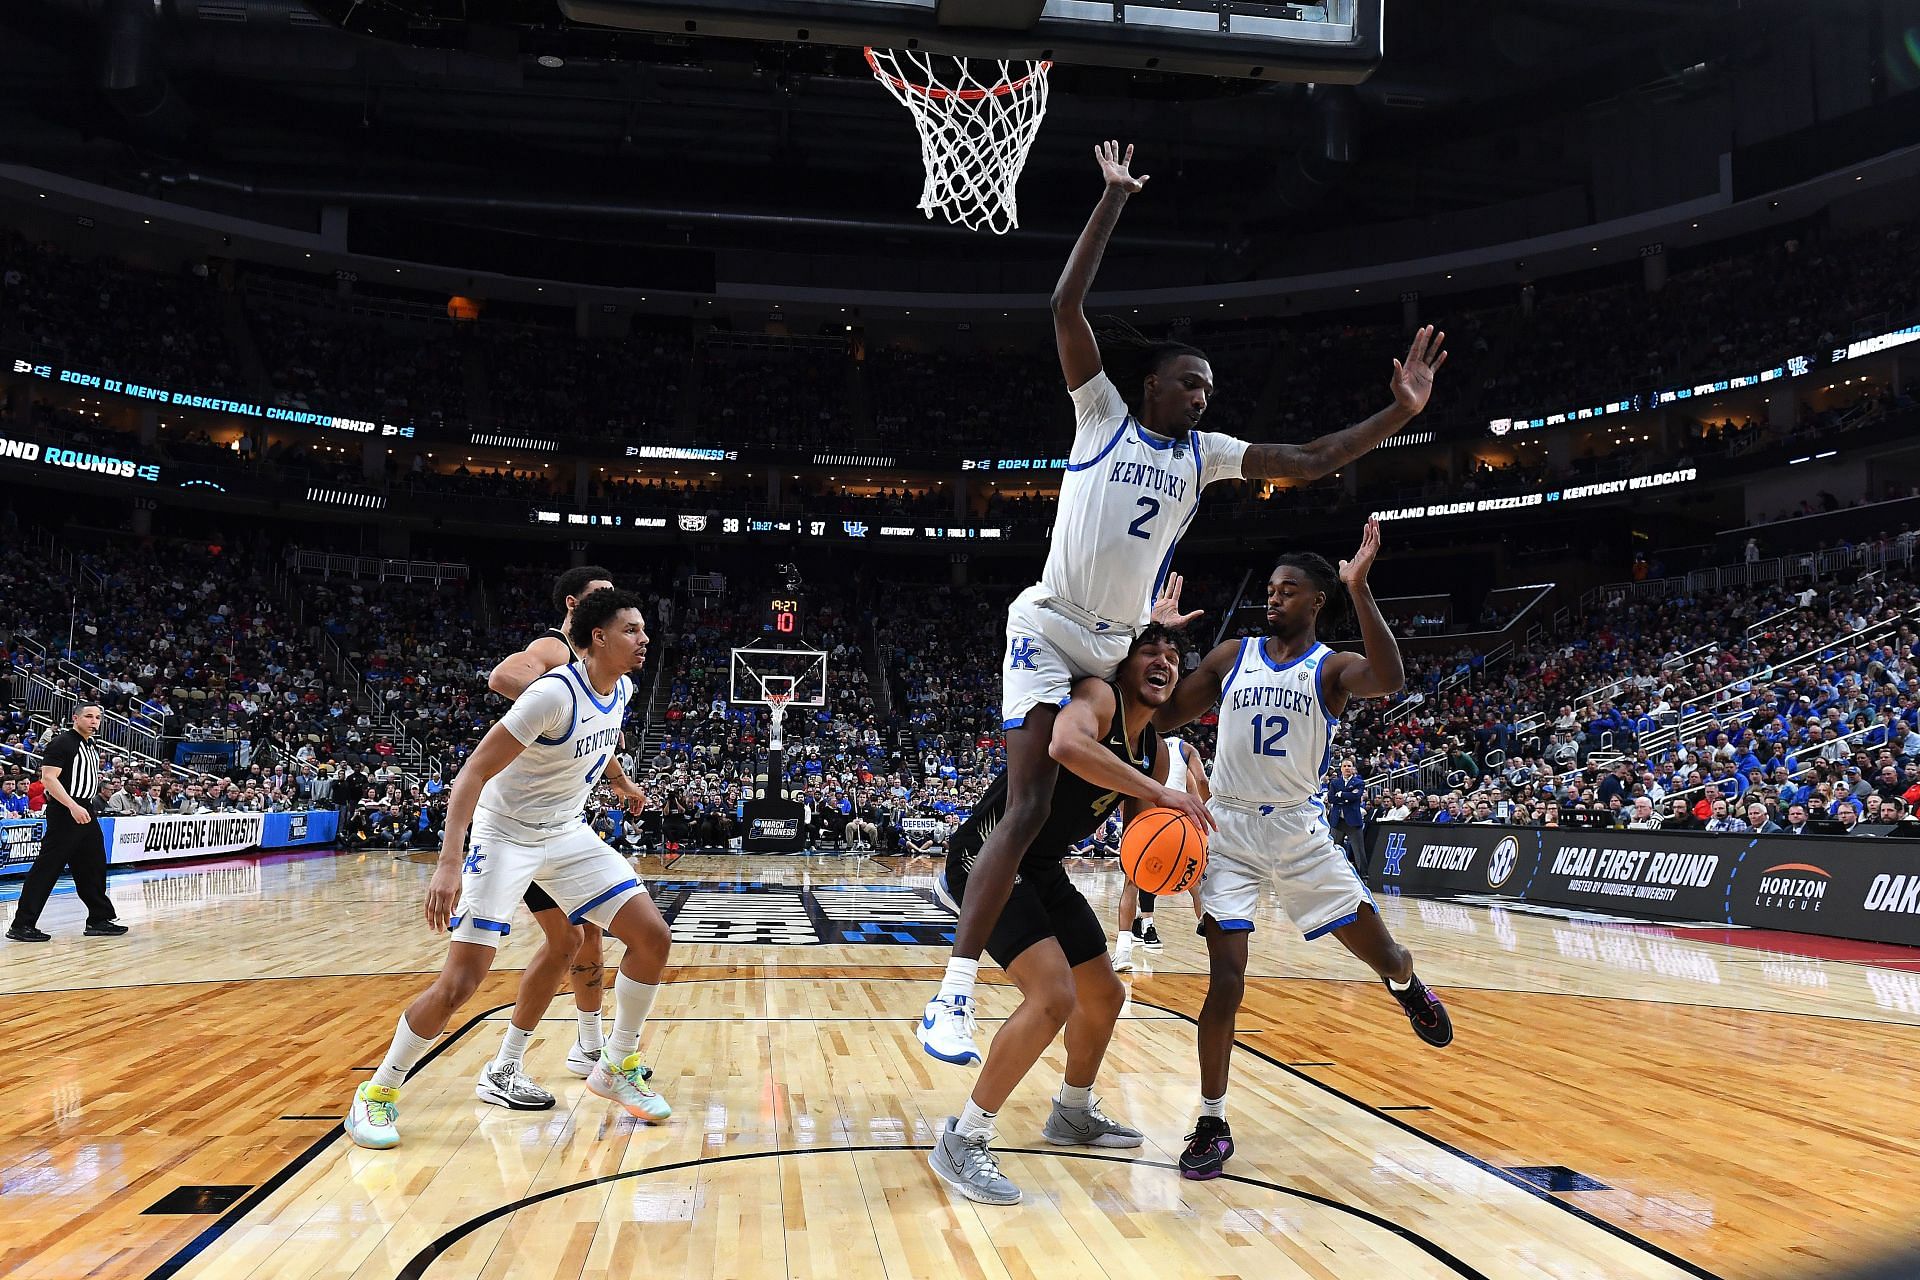 Another NCAA Tournament upset left Kentucky with a disappointing season.